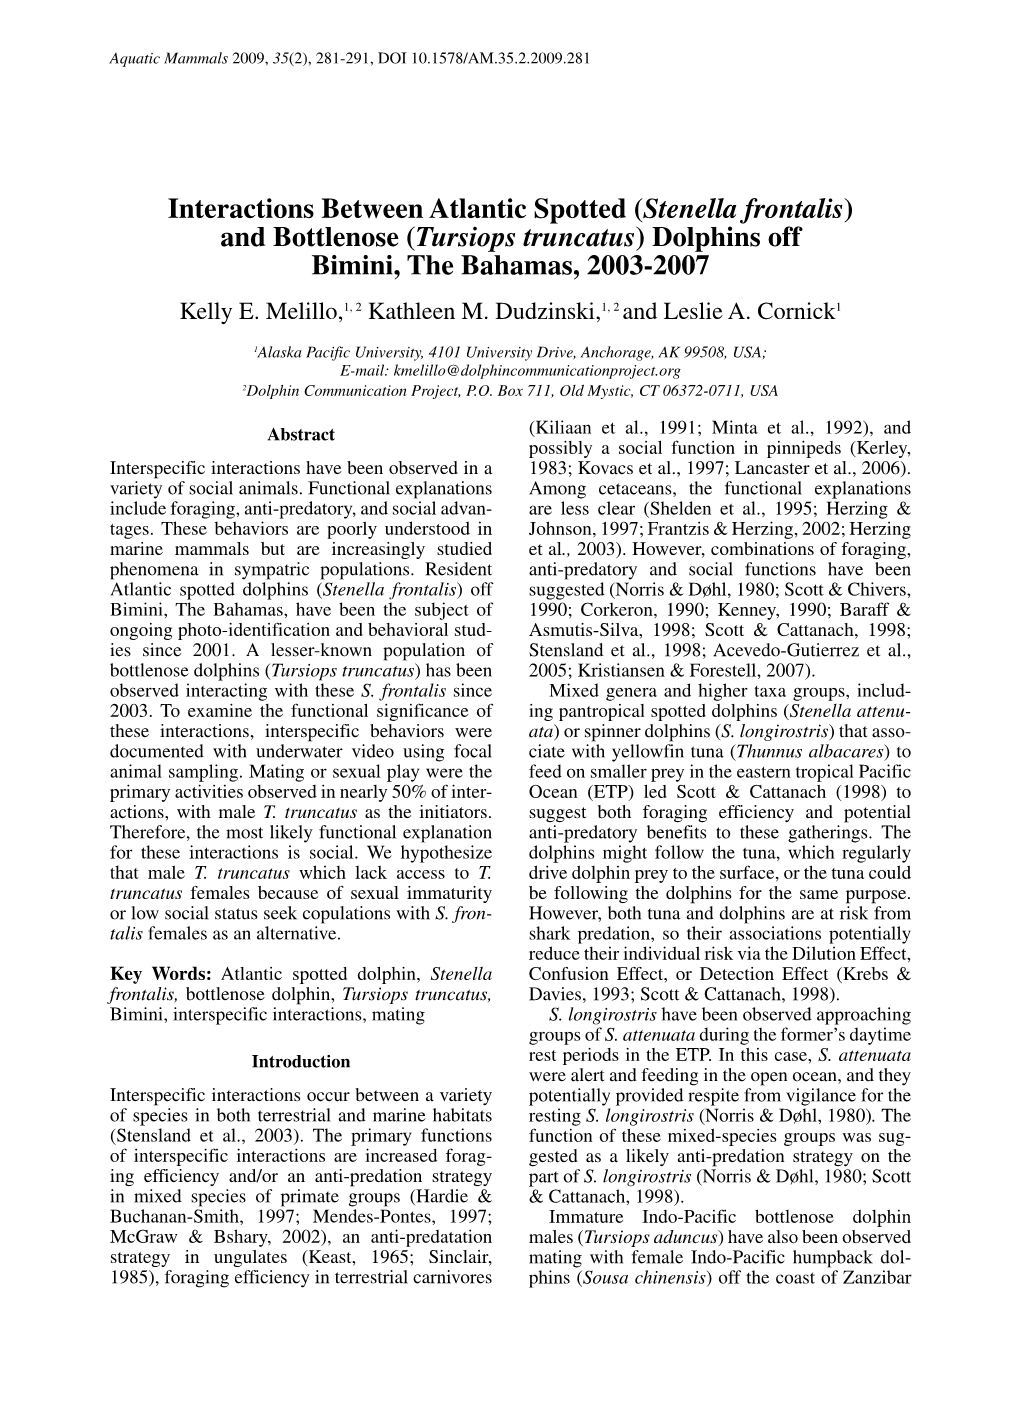 Interactions Between Atlantic Spotted (Stenella Frontalis) and Bottlenose (Tursiops Truncatus) Dolphins Off Bimini, the Bahamas, 2003-2007 Kelly E